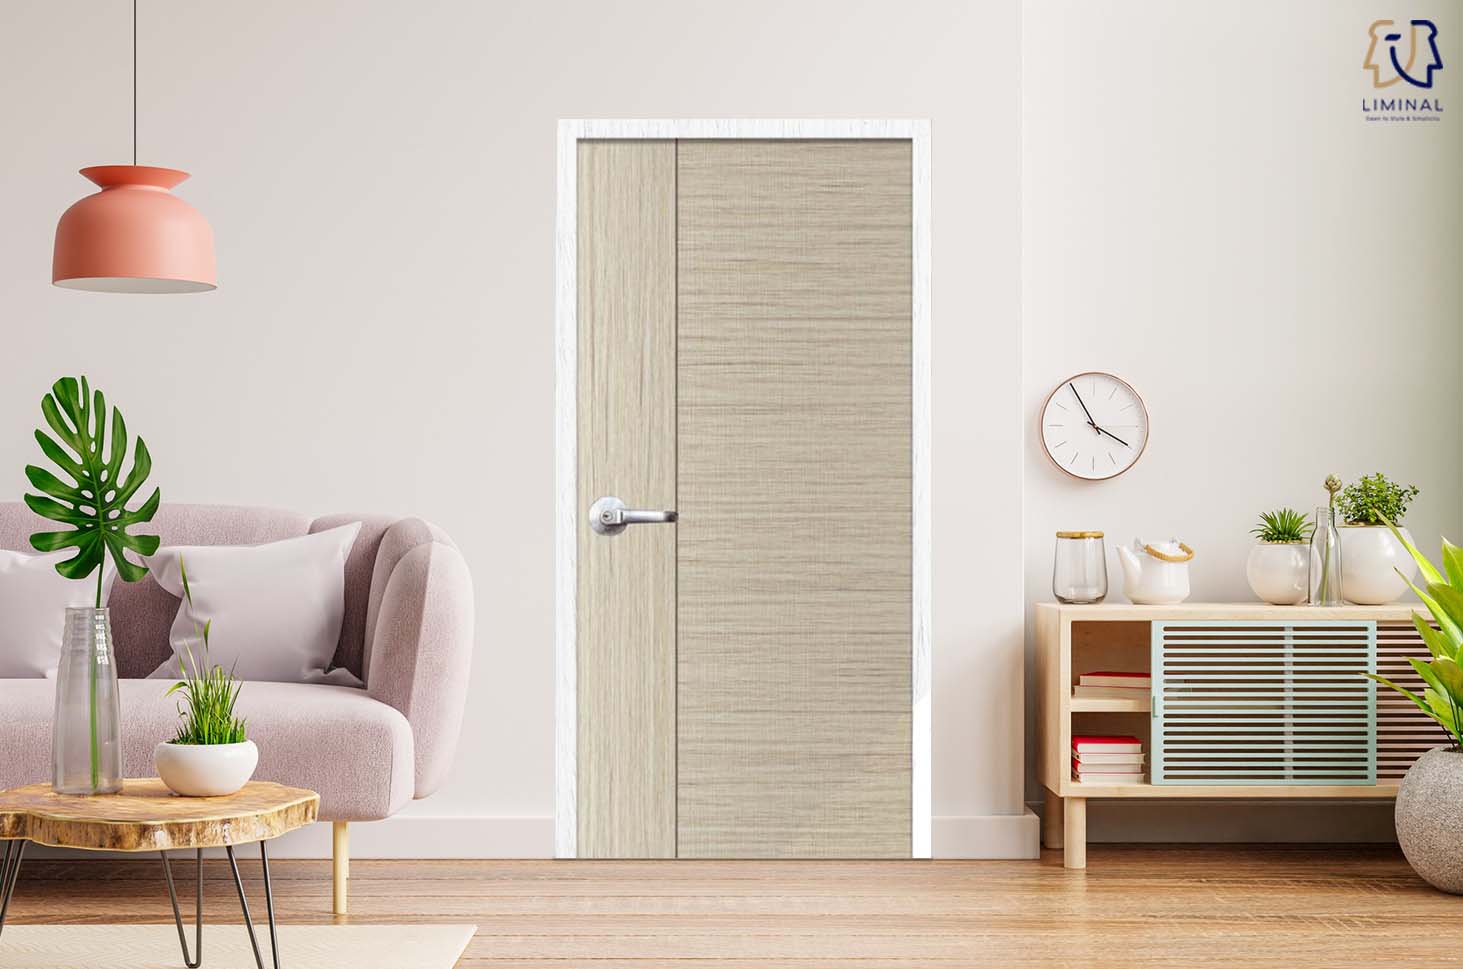 What are Laminate Doors and why are they Gaining Popularity?